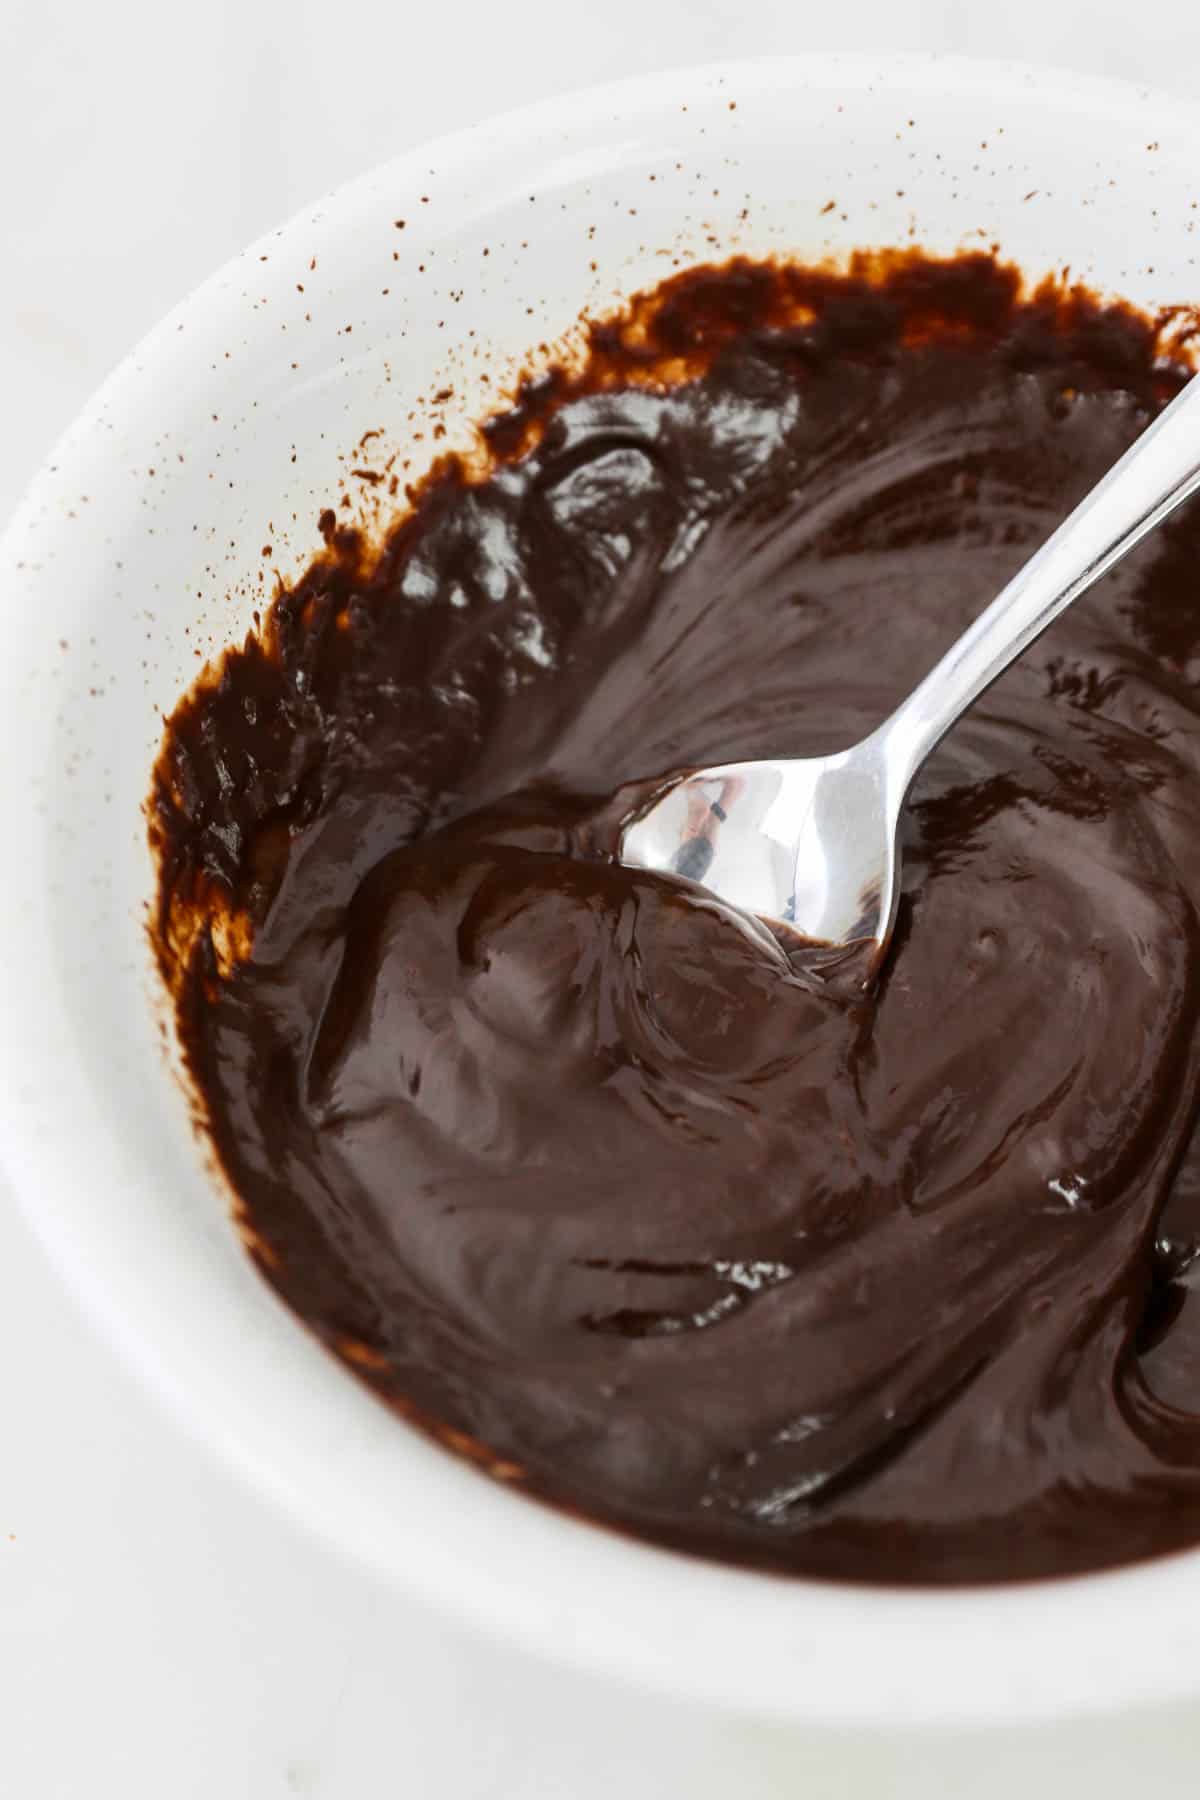 Chocolate ganache in a mixing bowl with a spoon.